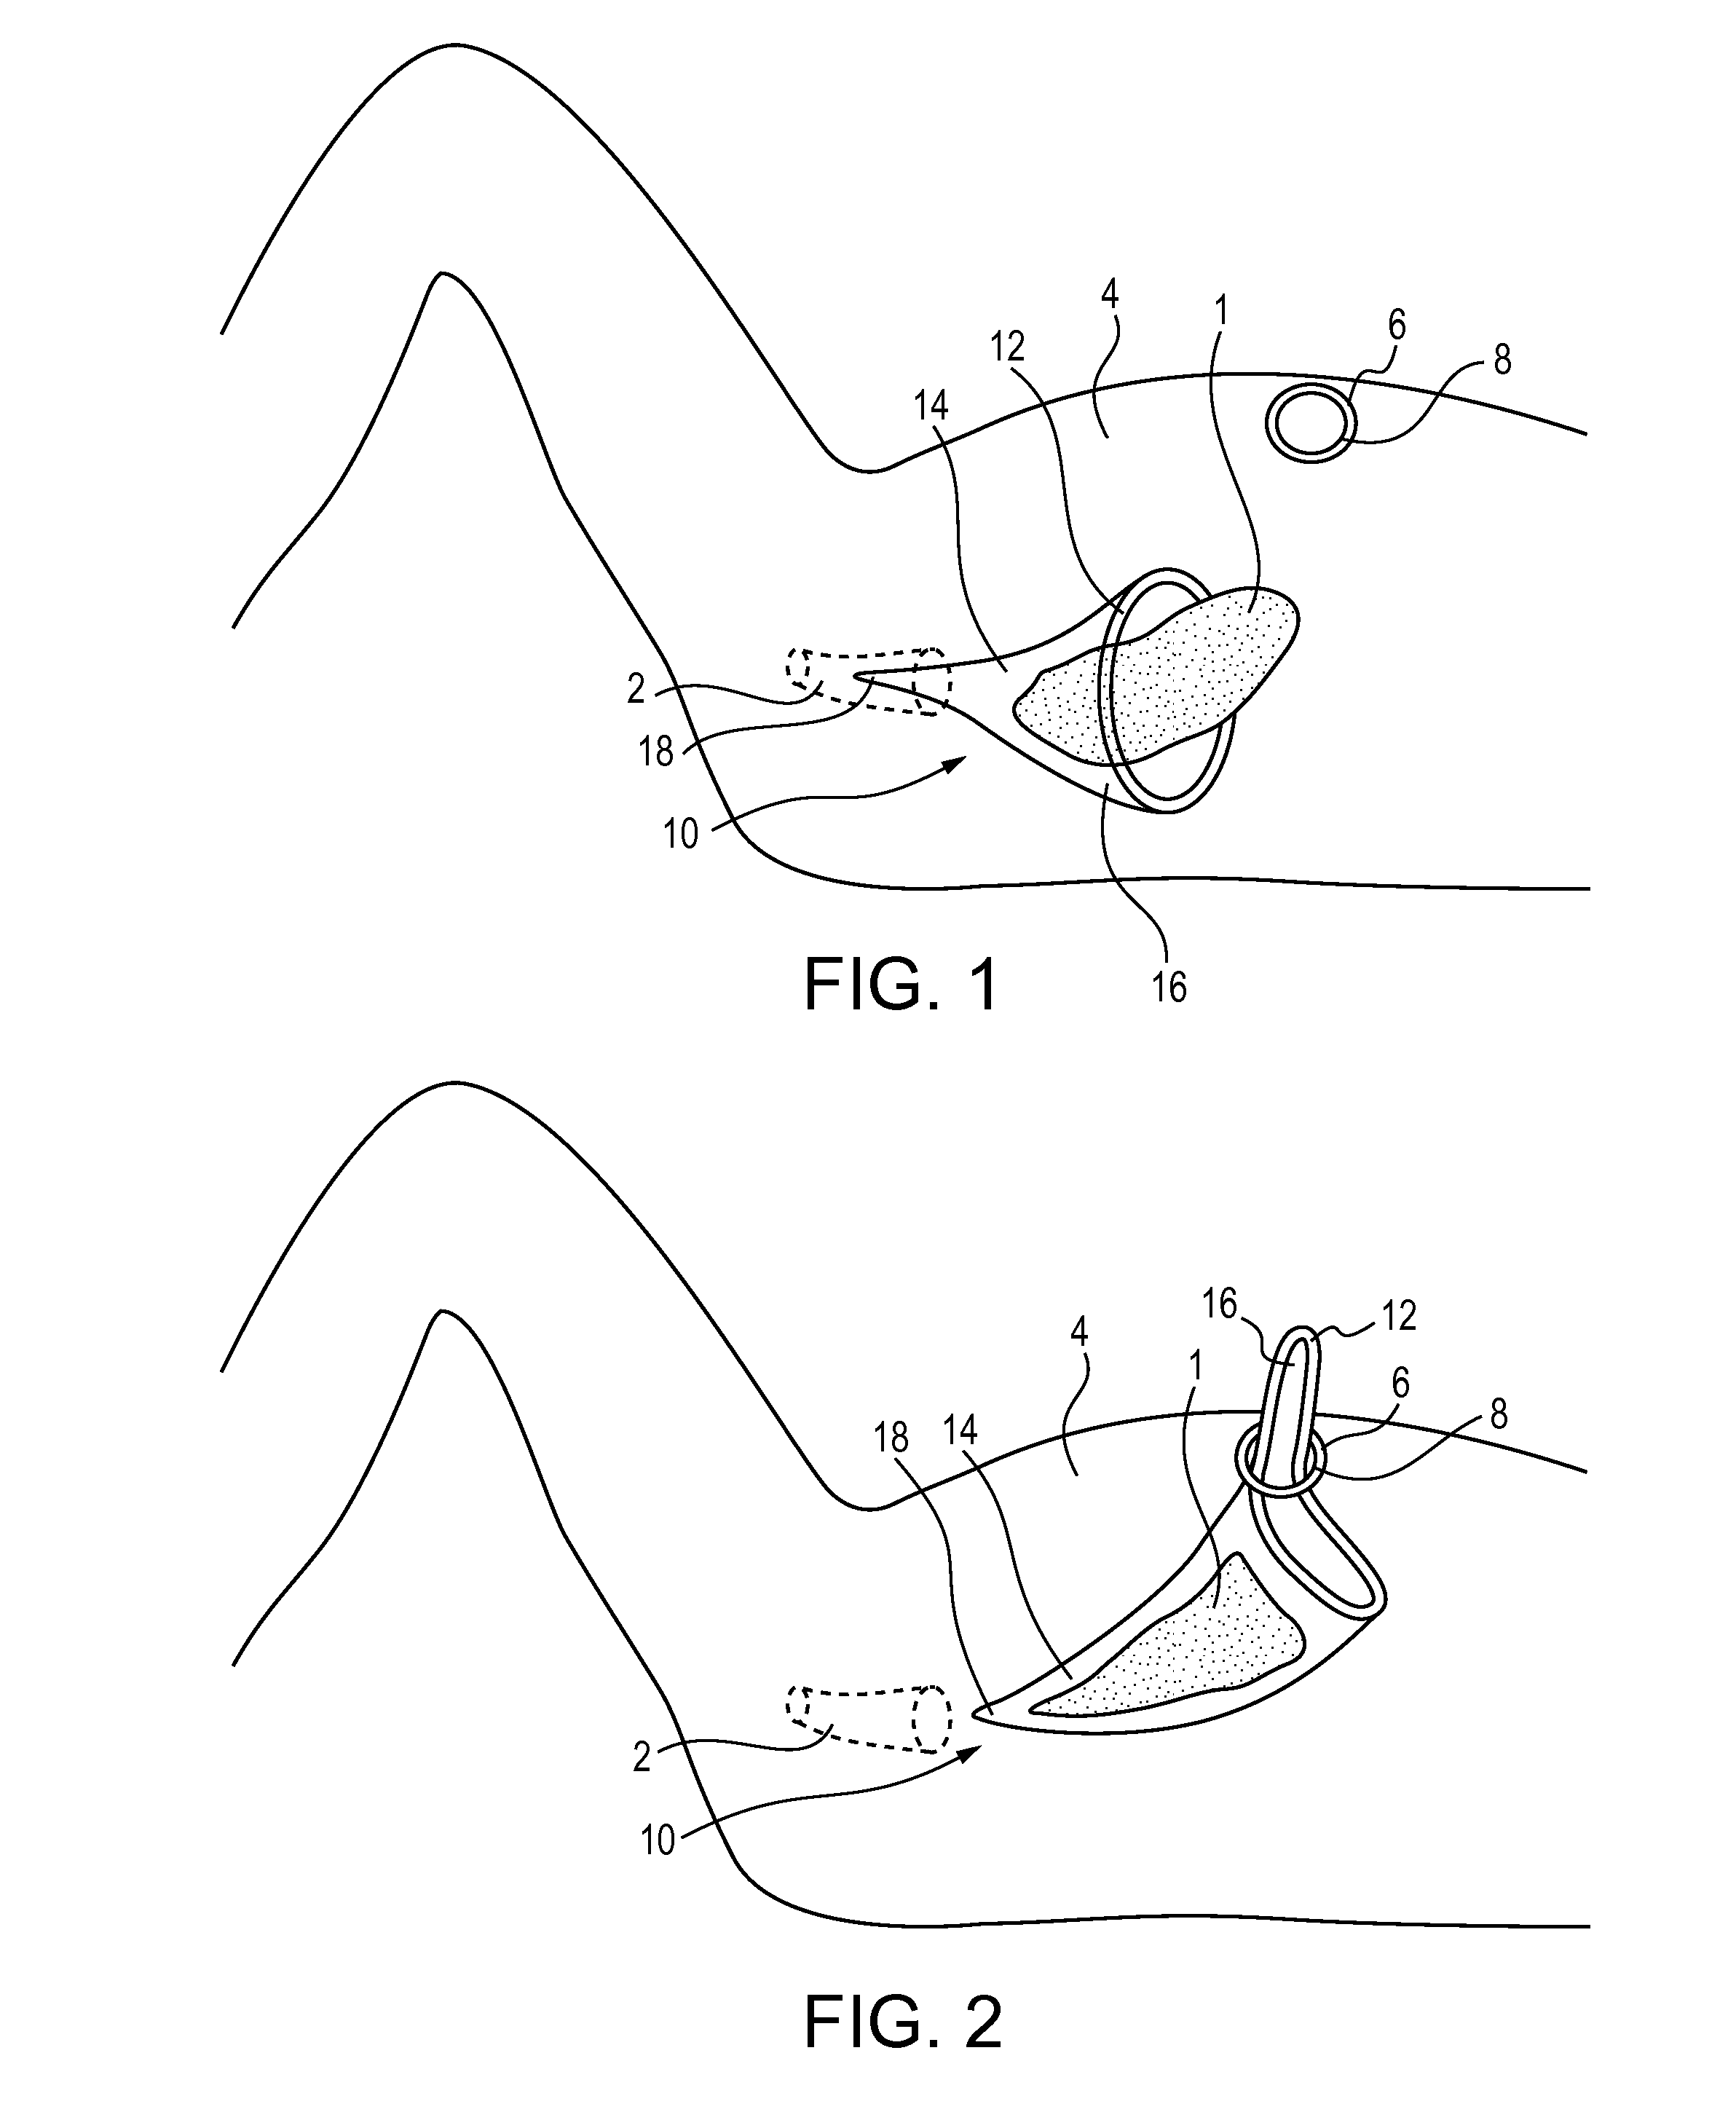 Methods for Isolating and Removing Tissue During a Female Patient's Laparoscopic Surgery